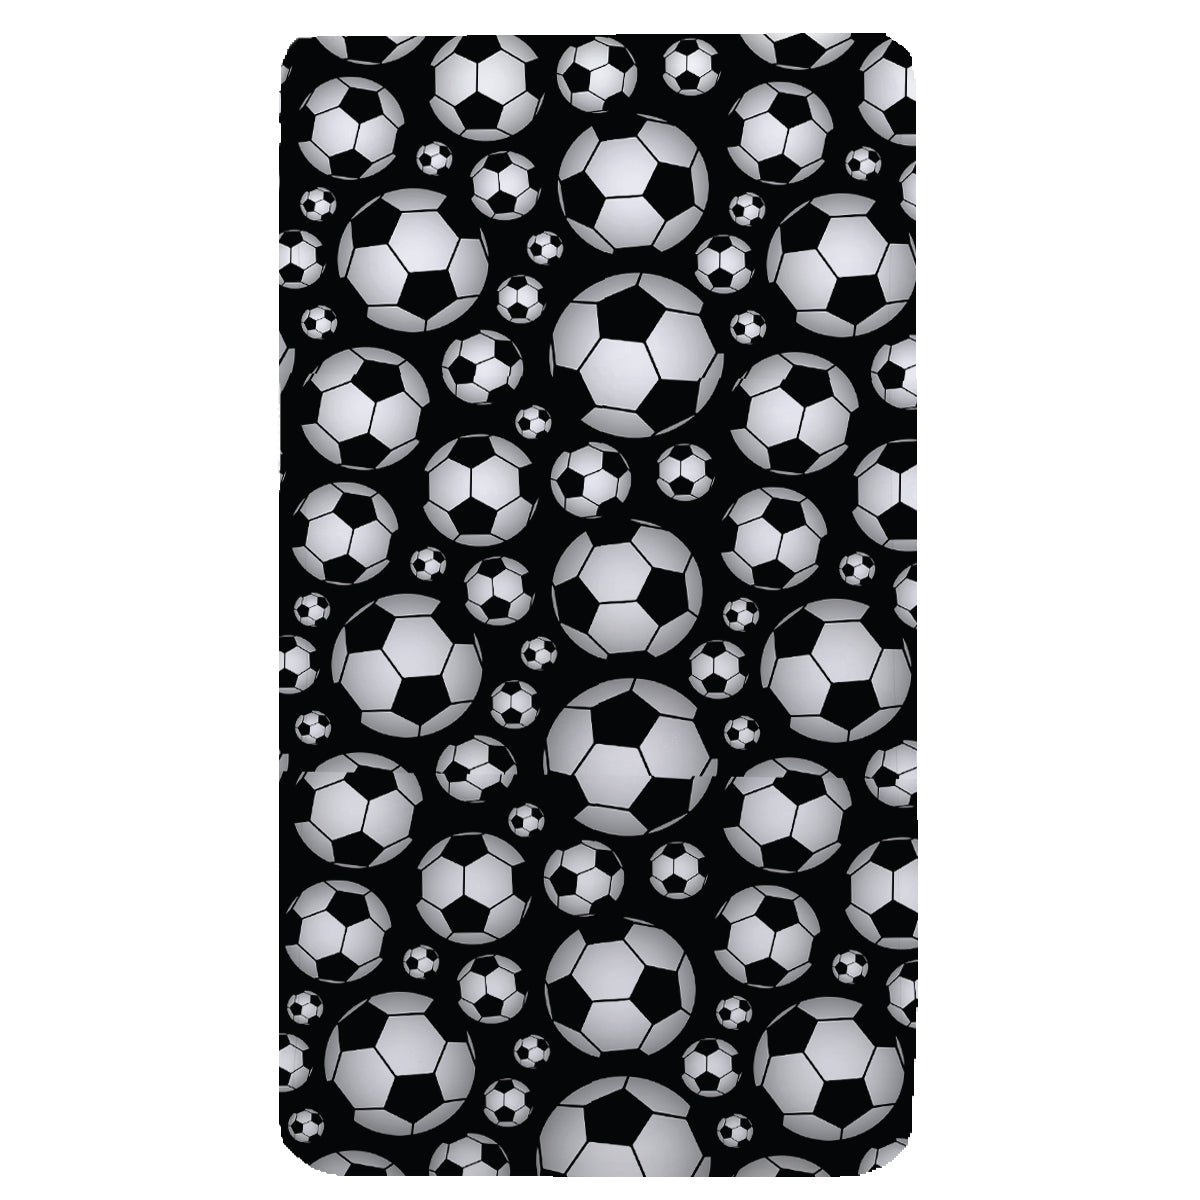 Soccer - Sensory Fitted Bed Sheet